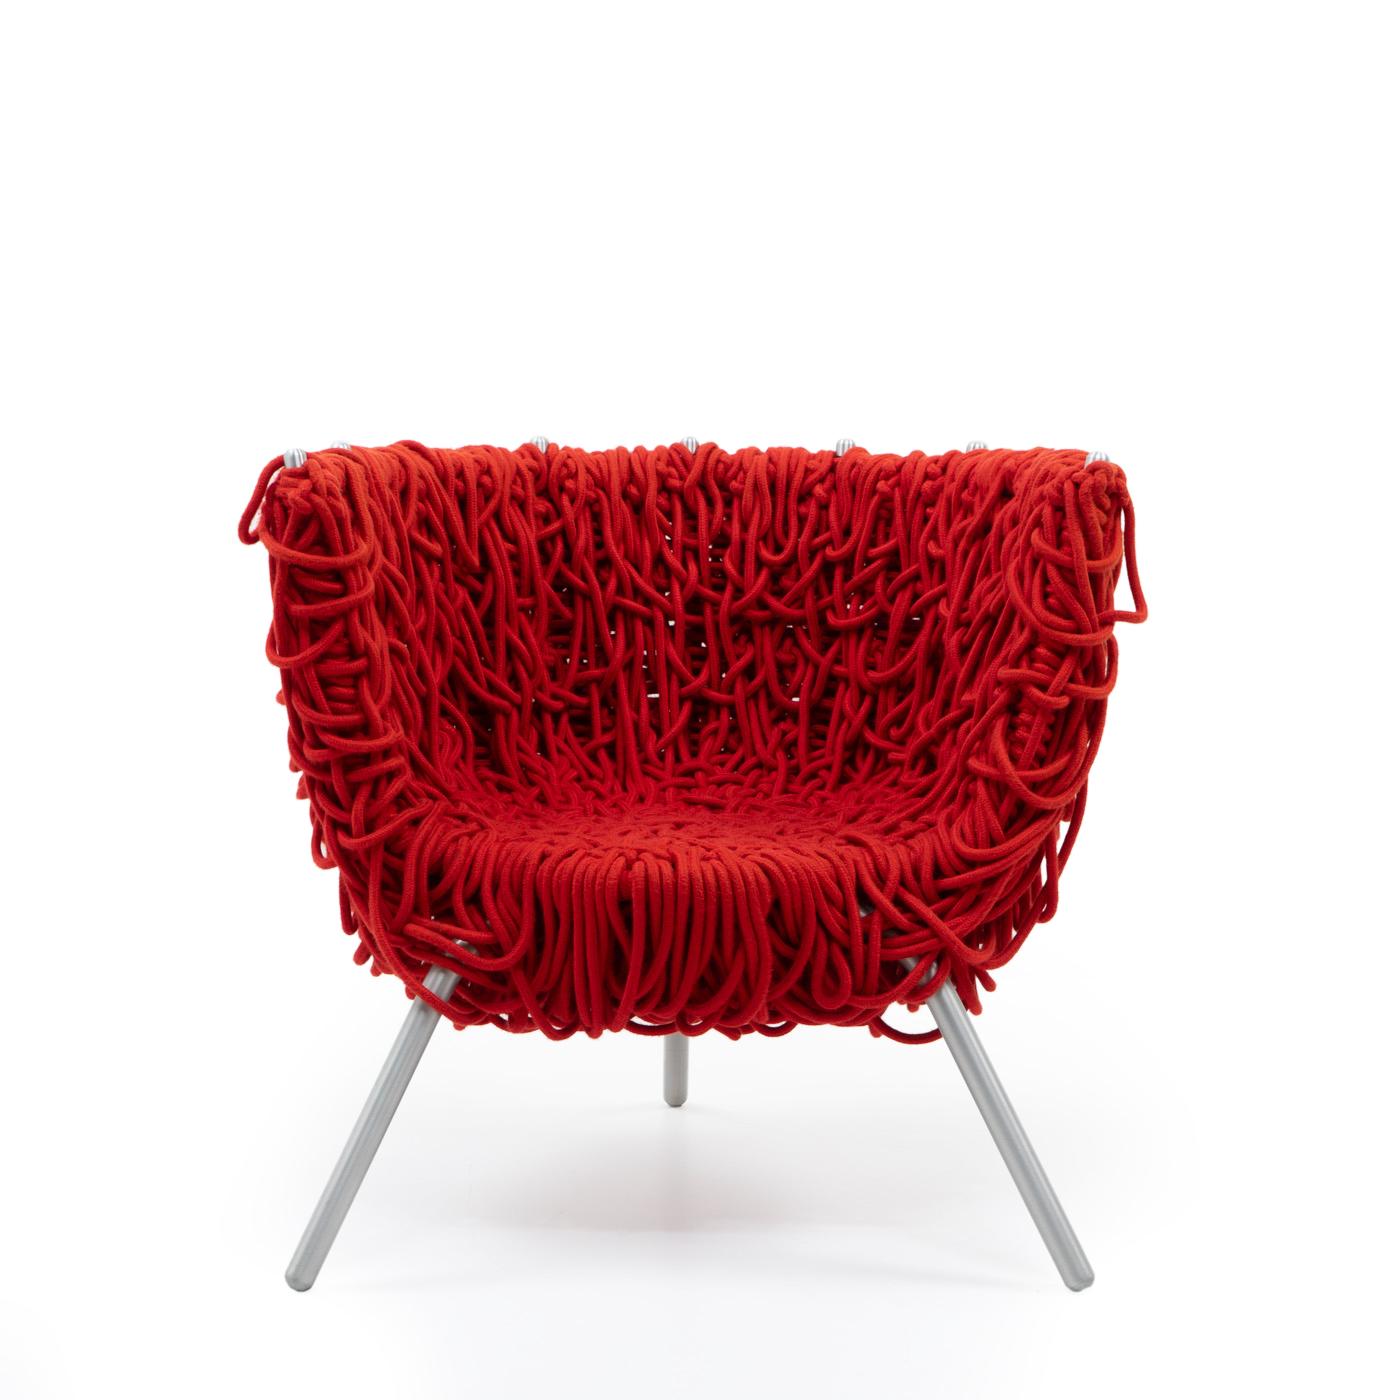 The Vermelha Chair by the Campana Brothers, stands out as a distinctive piece of contemporary design. 

Infused with inspiration from Brazilian culture, the chair showcases a unique and intricate design, embodying the avant-garde style of the